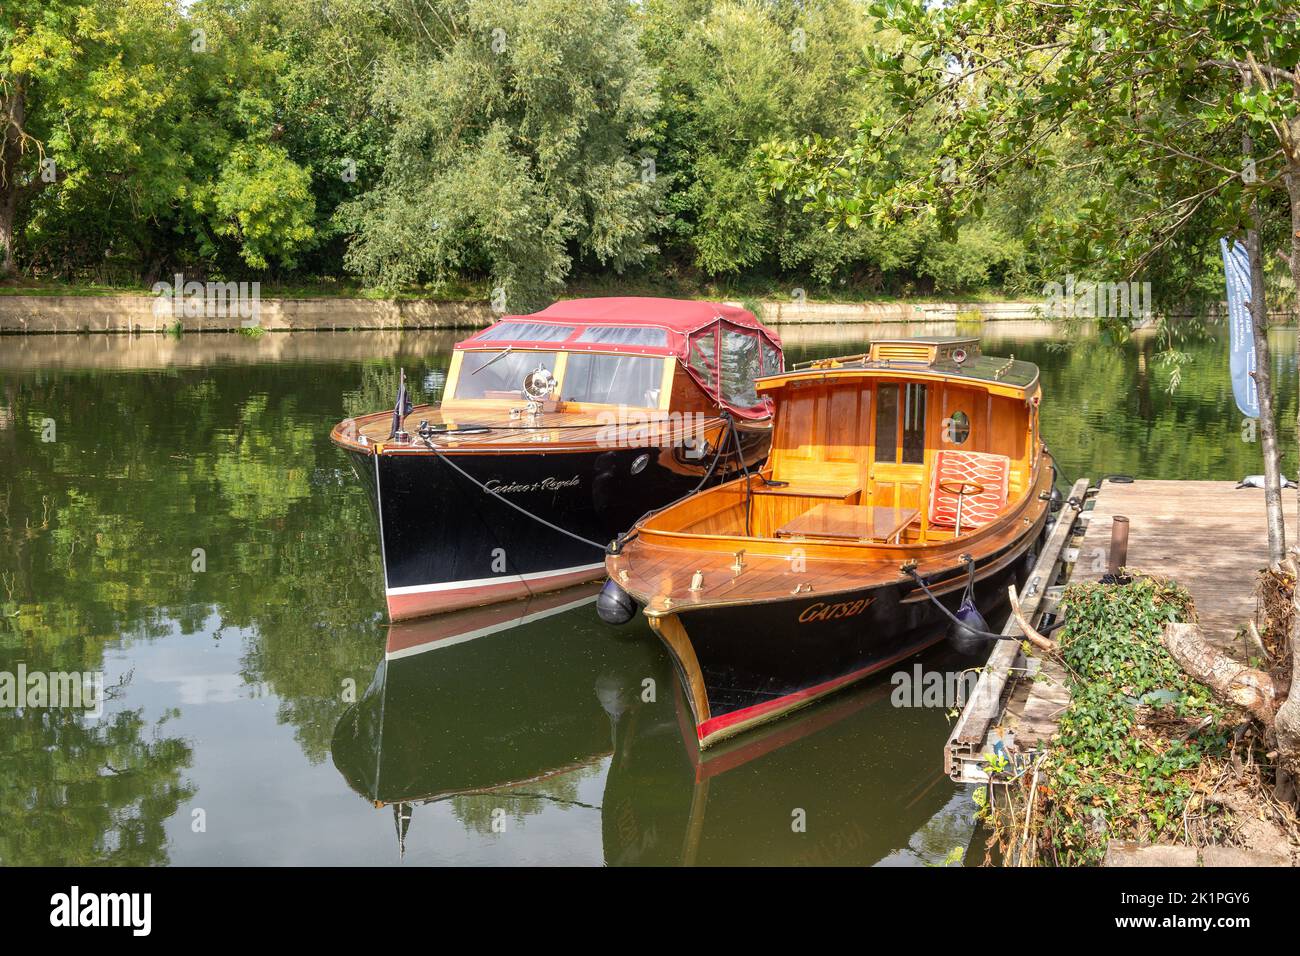 Classic Wooden Launches, Sonning Wharf, Sonning, Vereinigtes Königreich Stockfoto